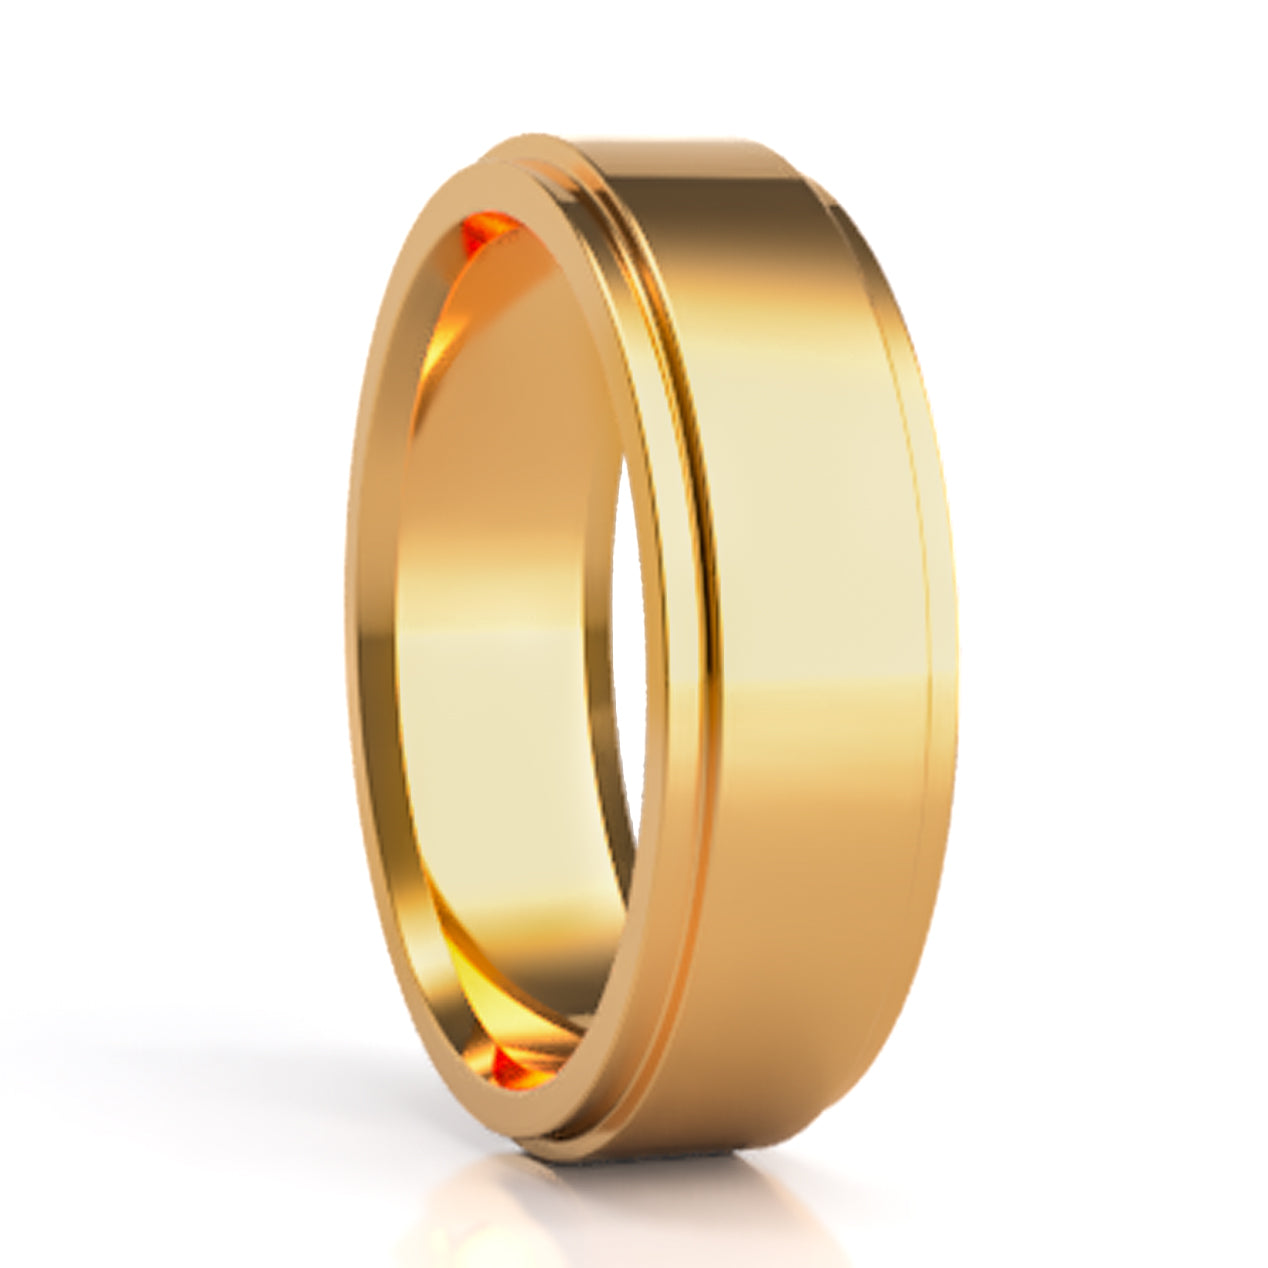 A 14k yellow gold wedding band with stepped edges displayed on a neutral white background.